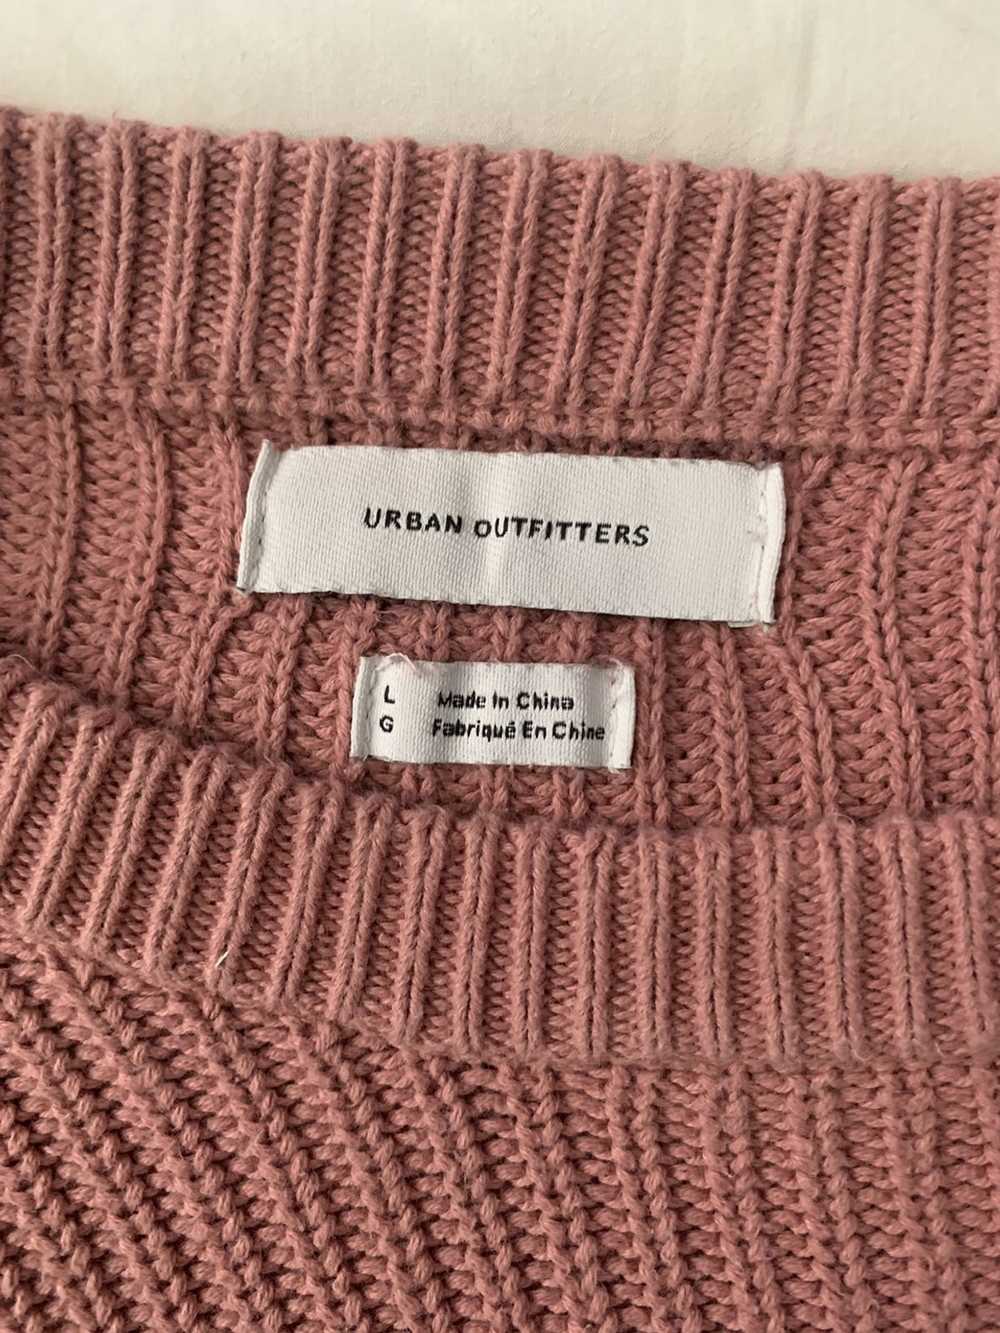 Urban Outfitters Urban Outfitters Knit Sweater - image 2